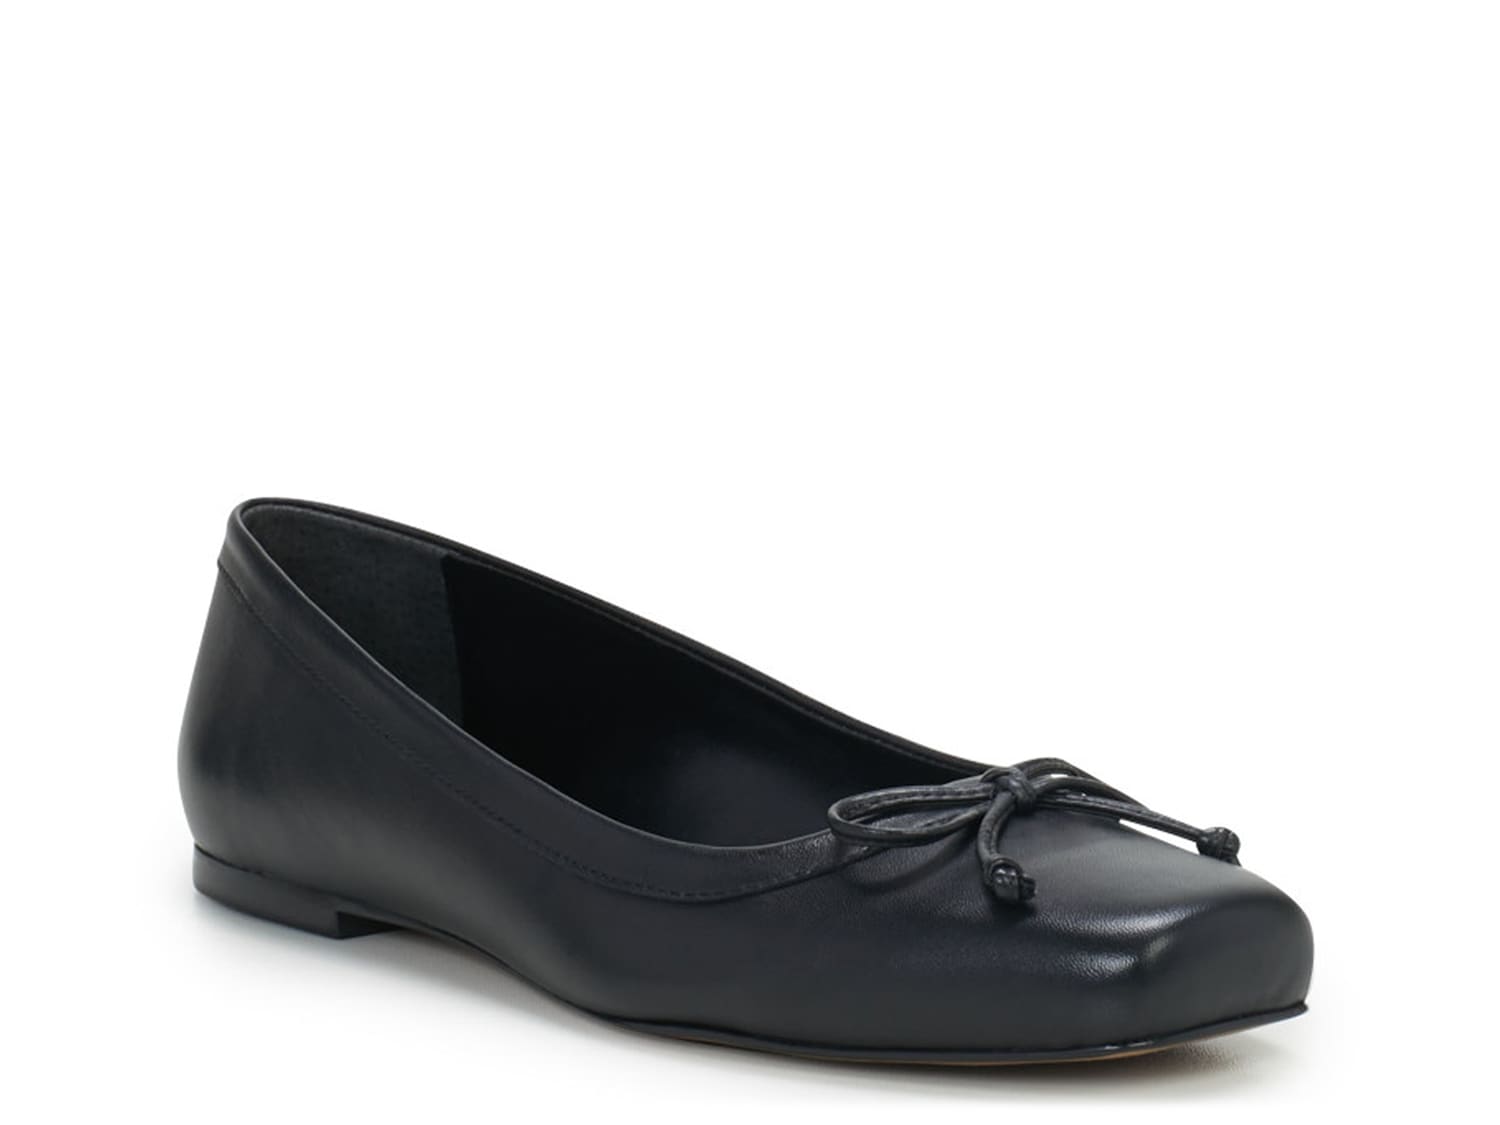 Vince Camuto Corrine Flat - Free Shipping | DSW